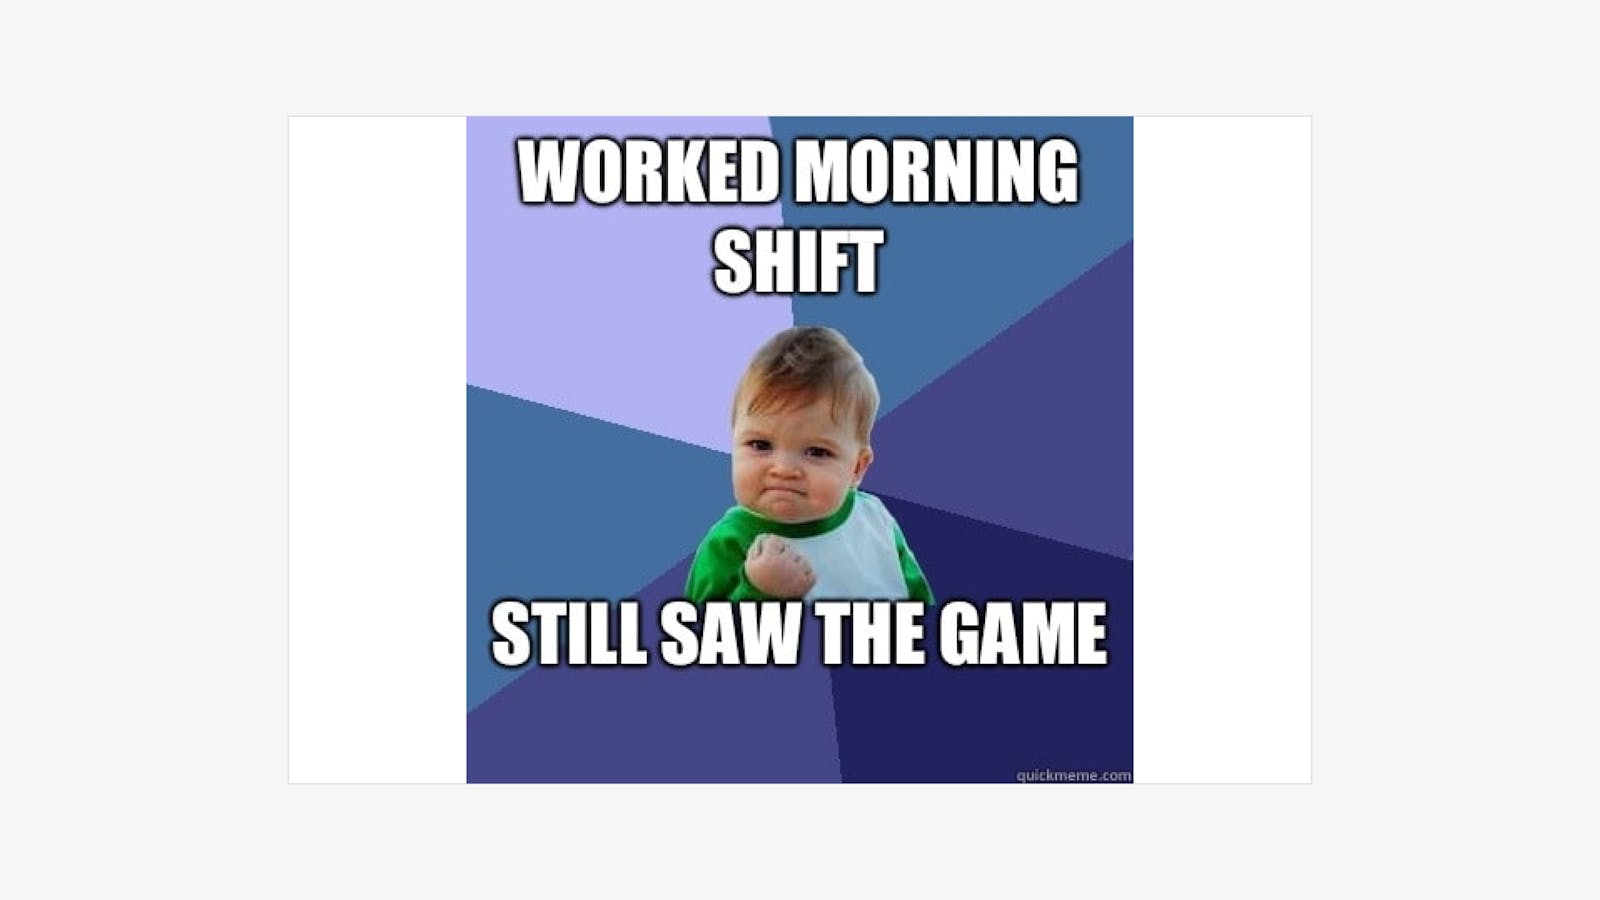 Restaurant meme with baby about working a morning shift.